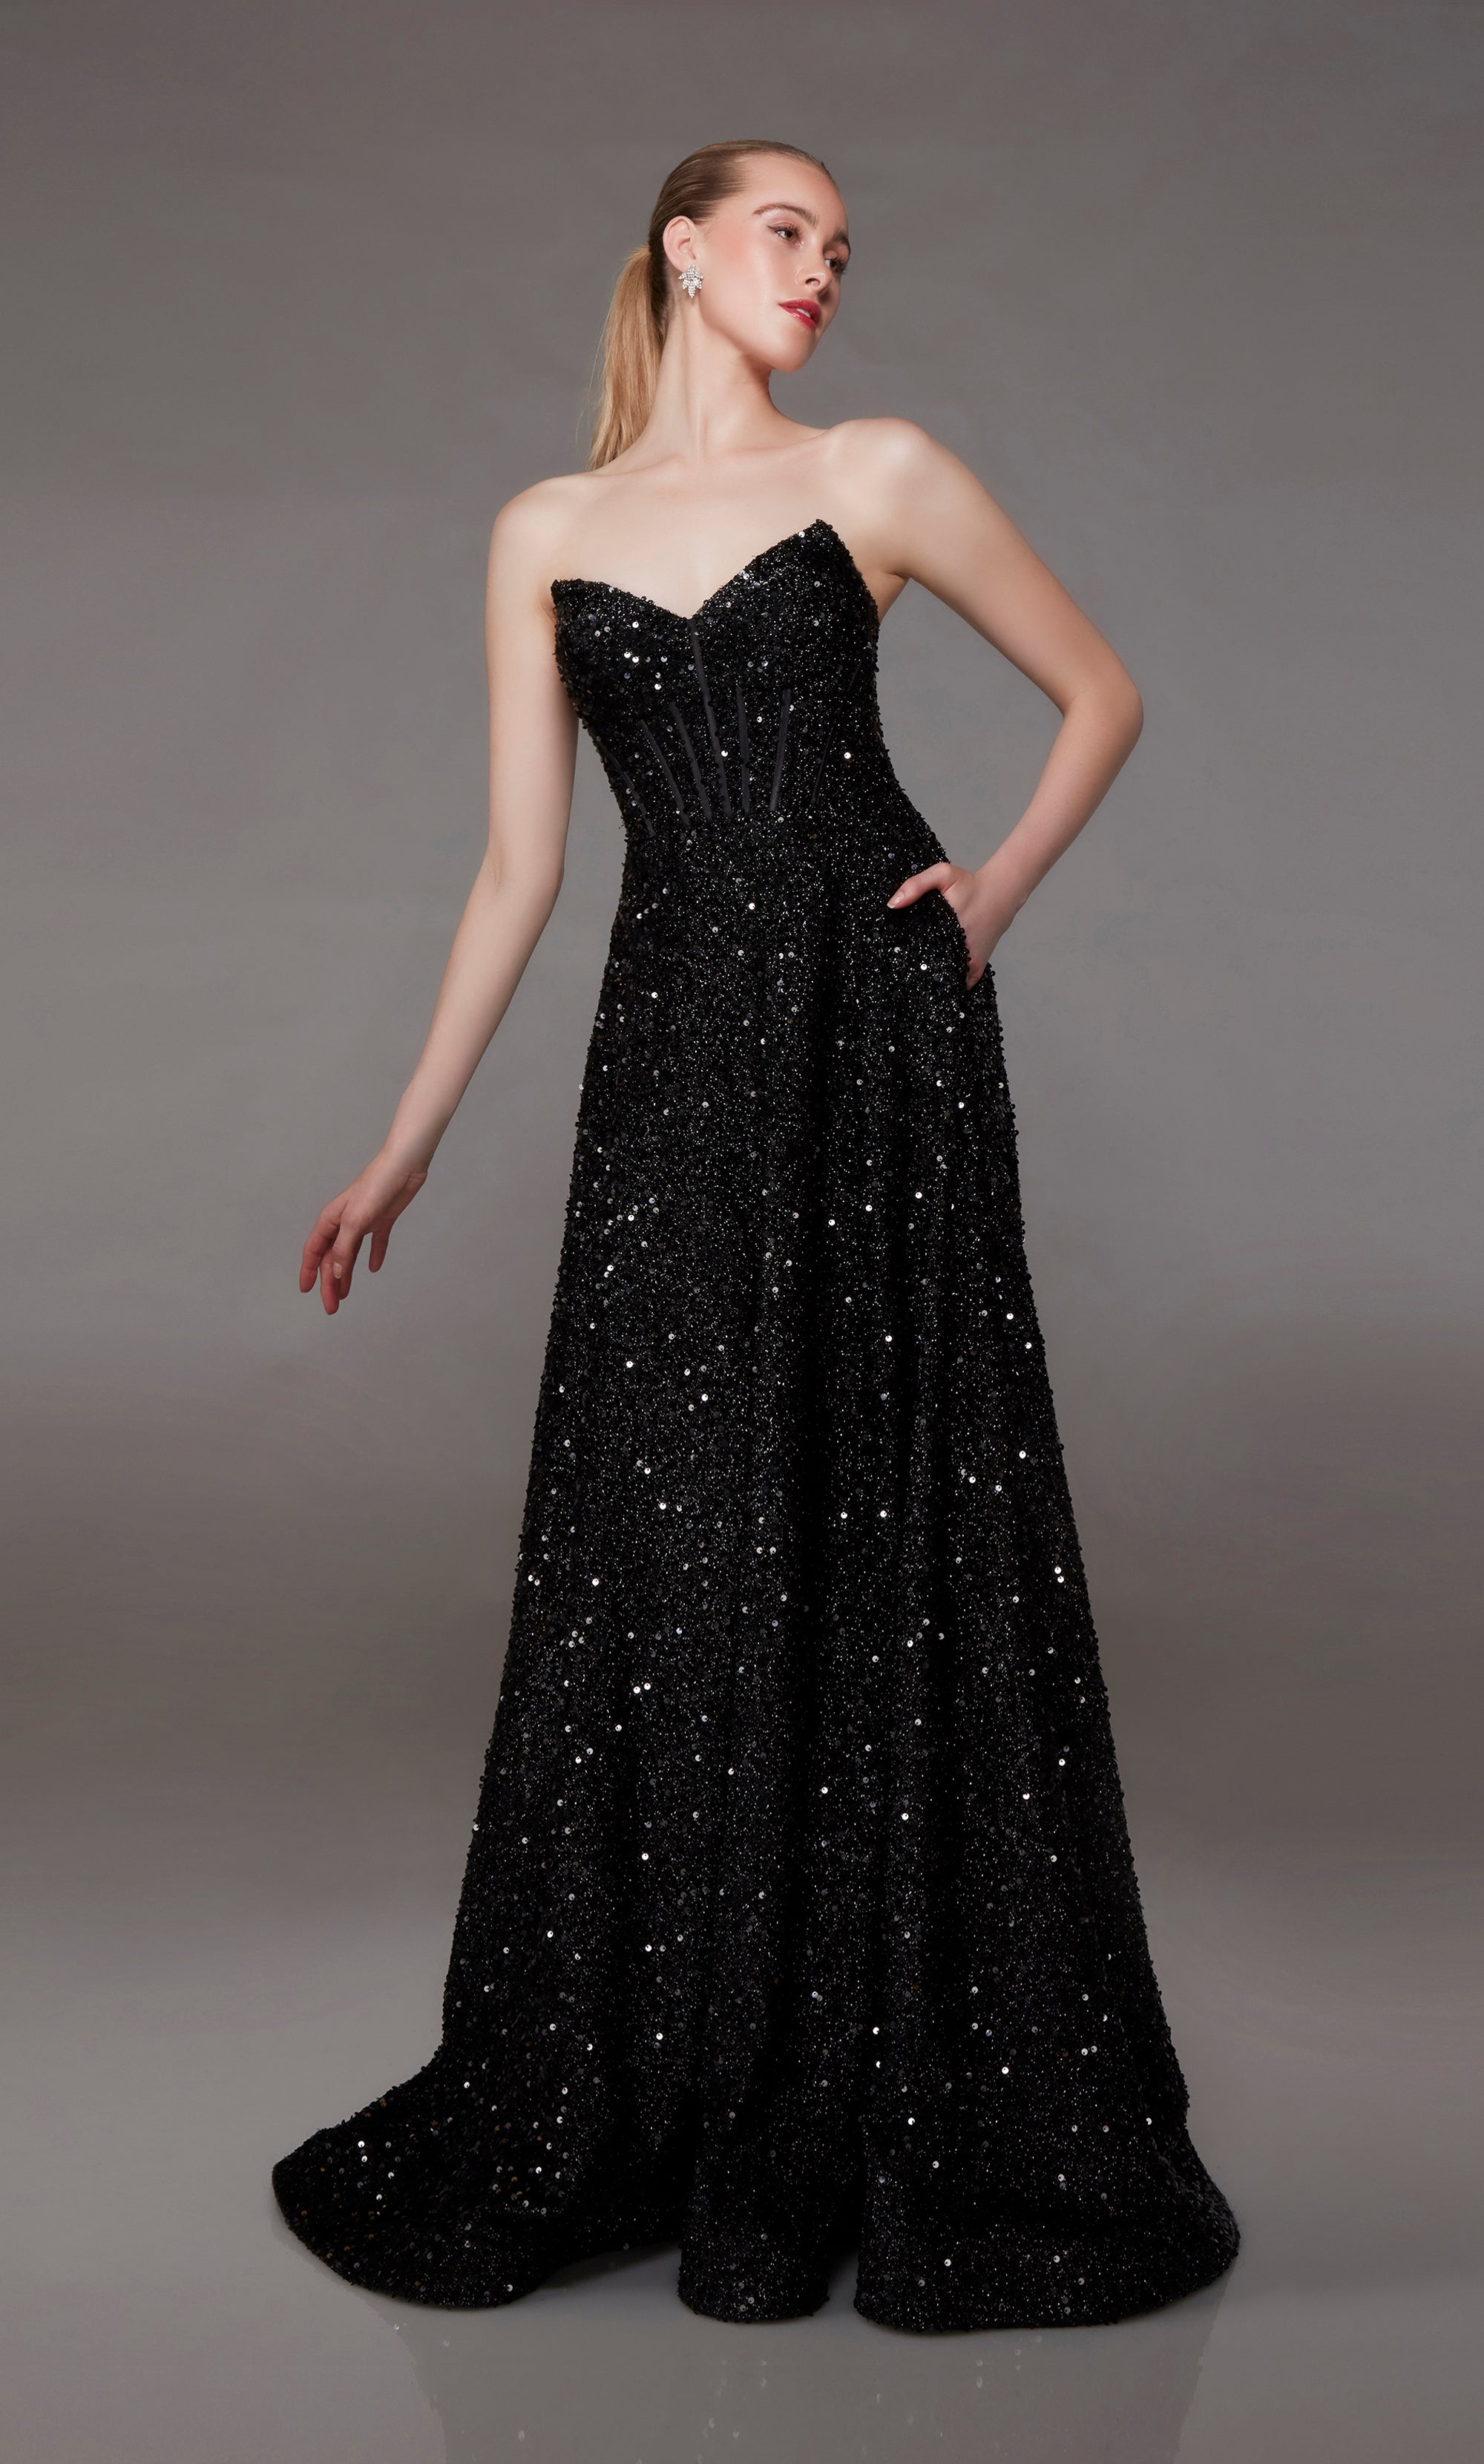 Elegant black prom dress: Strapless corset top, A-line skirt, lace-up back, elegant train, and practical pockets for an stylish and functional look.